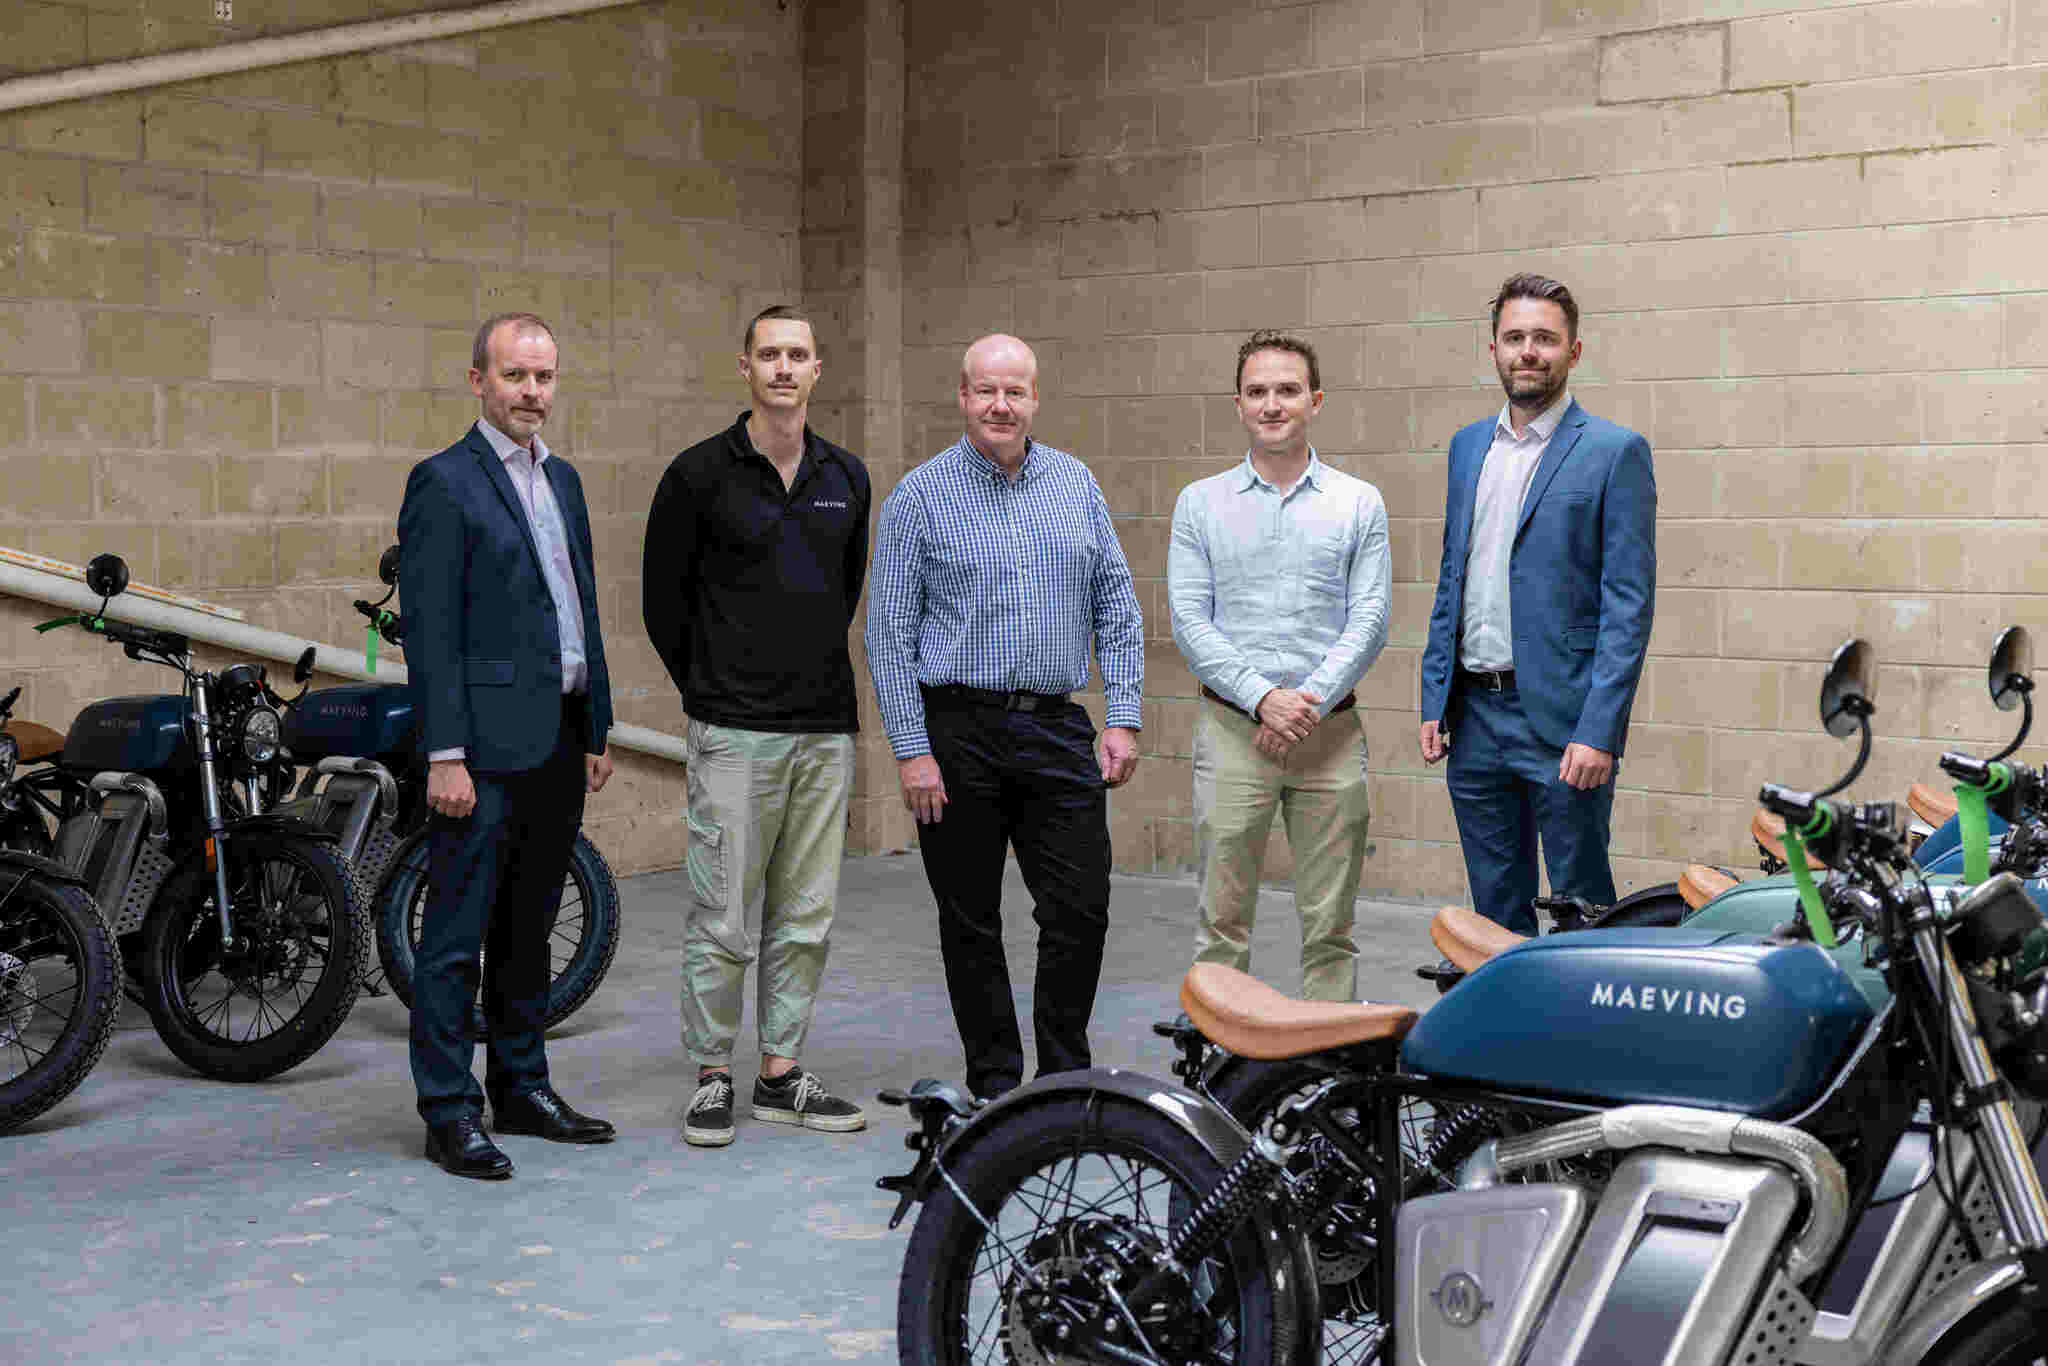 MEIF Maven Debt Finance provides £1million to electric motorcycle firm